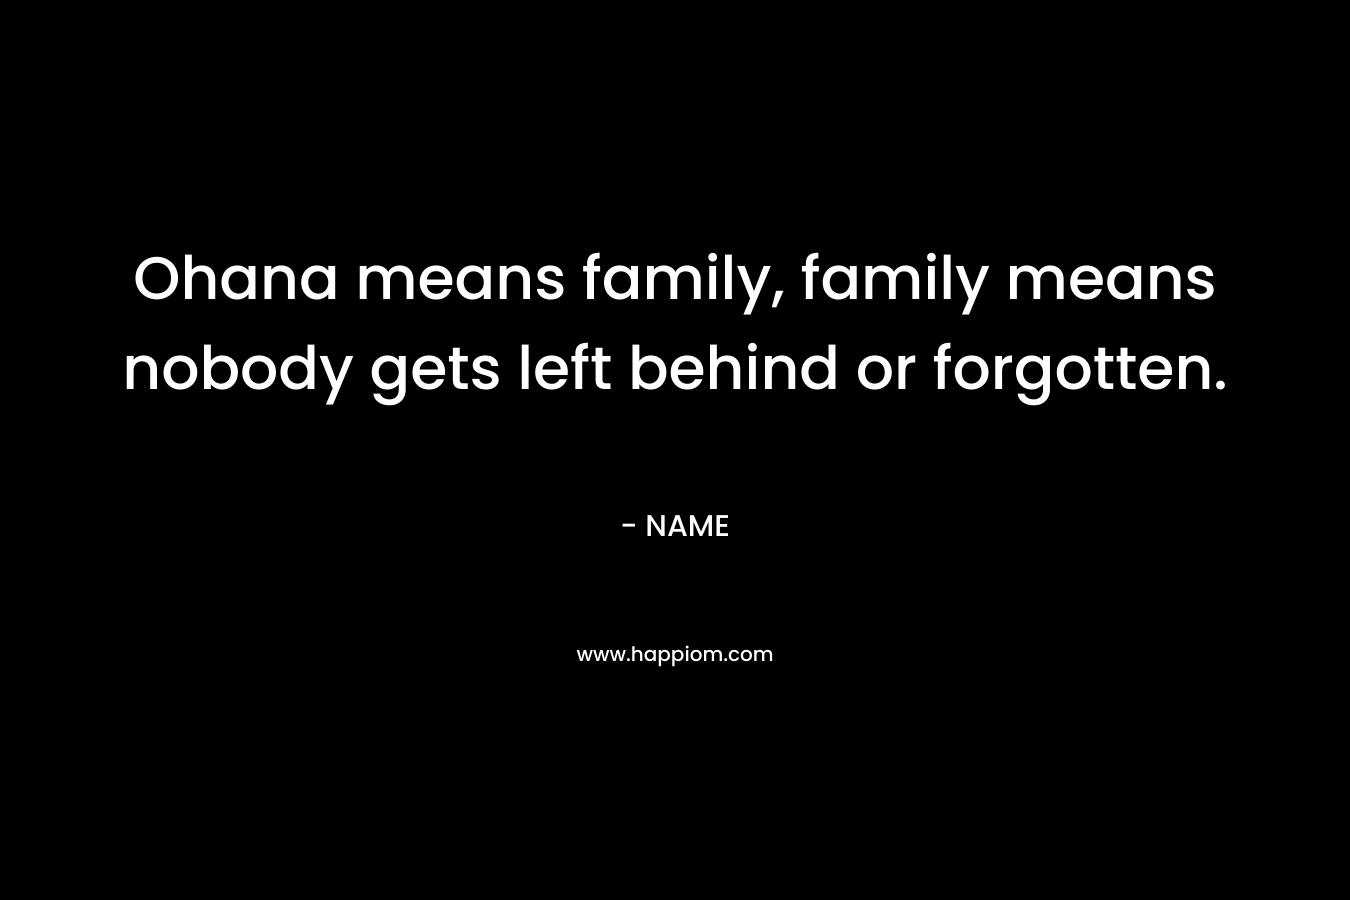 Ohana means family, family means nobody gets left behind or forgotten. – NAME